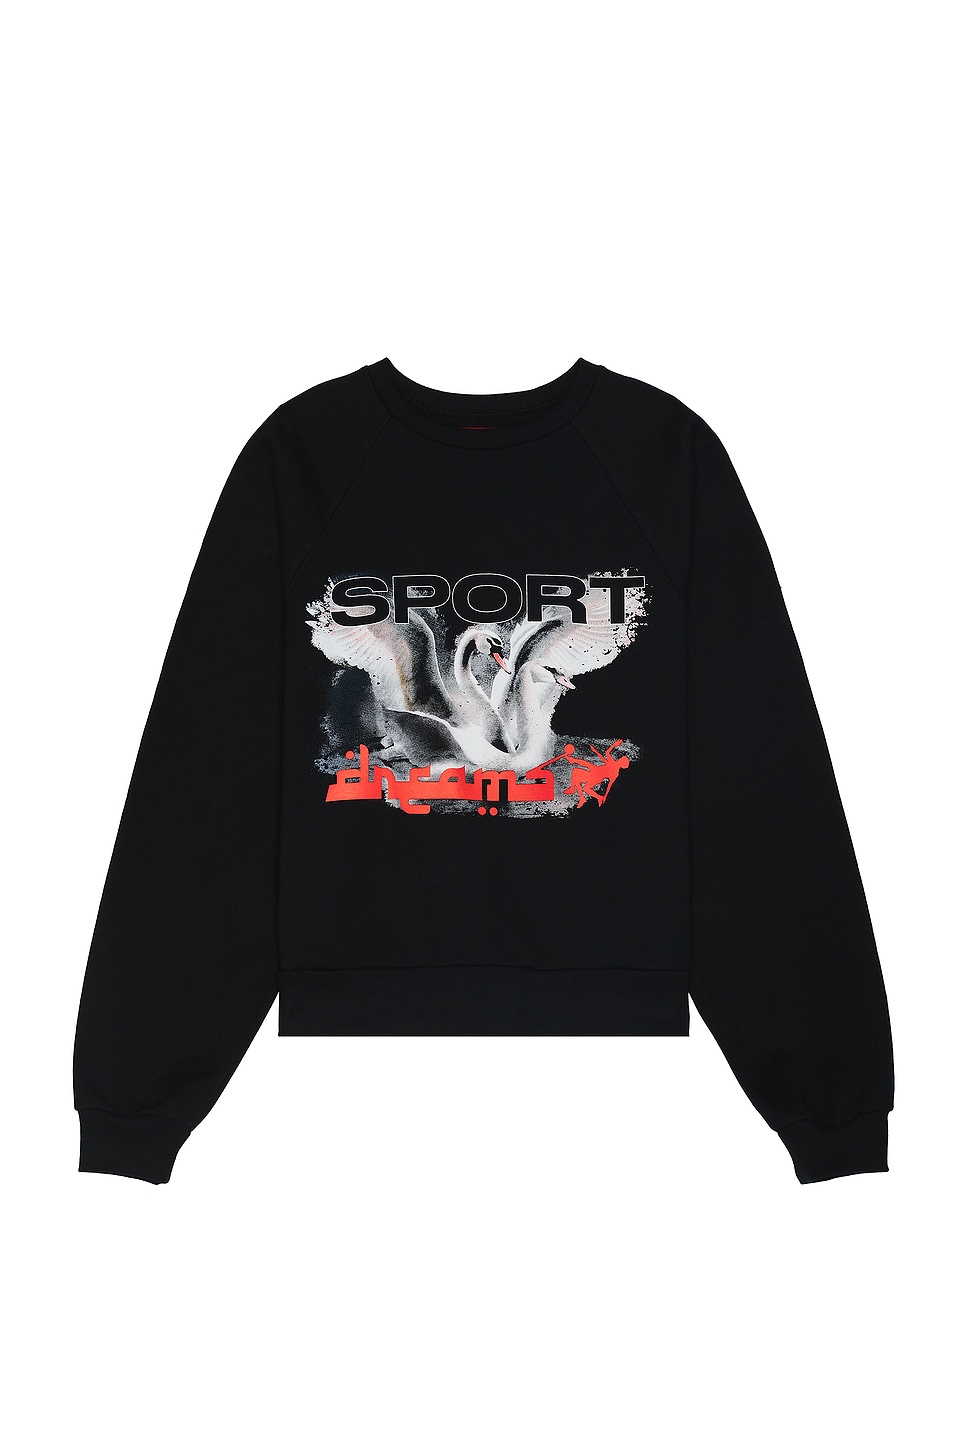 Image 1 of Liberal Youth Ministry Mens Swans Sweatshirt Knit in Black